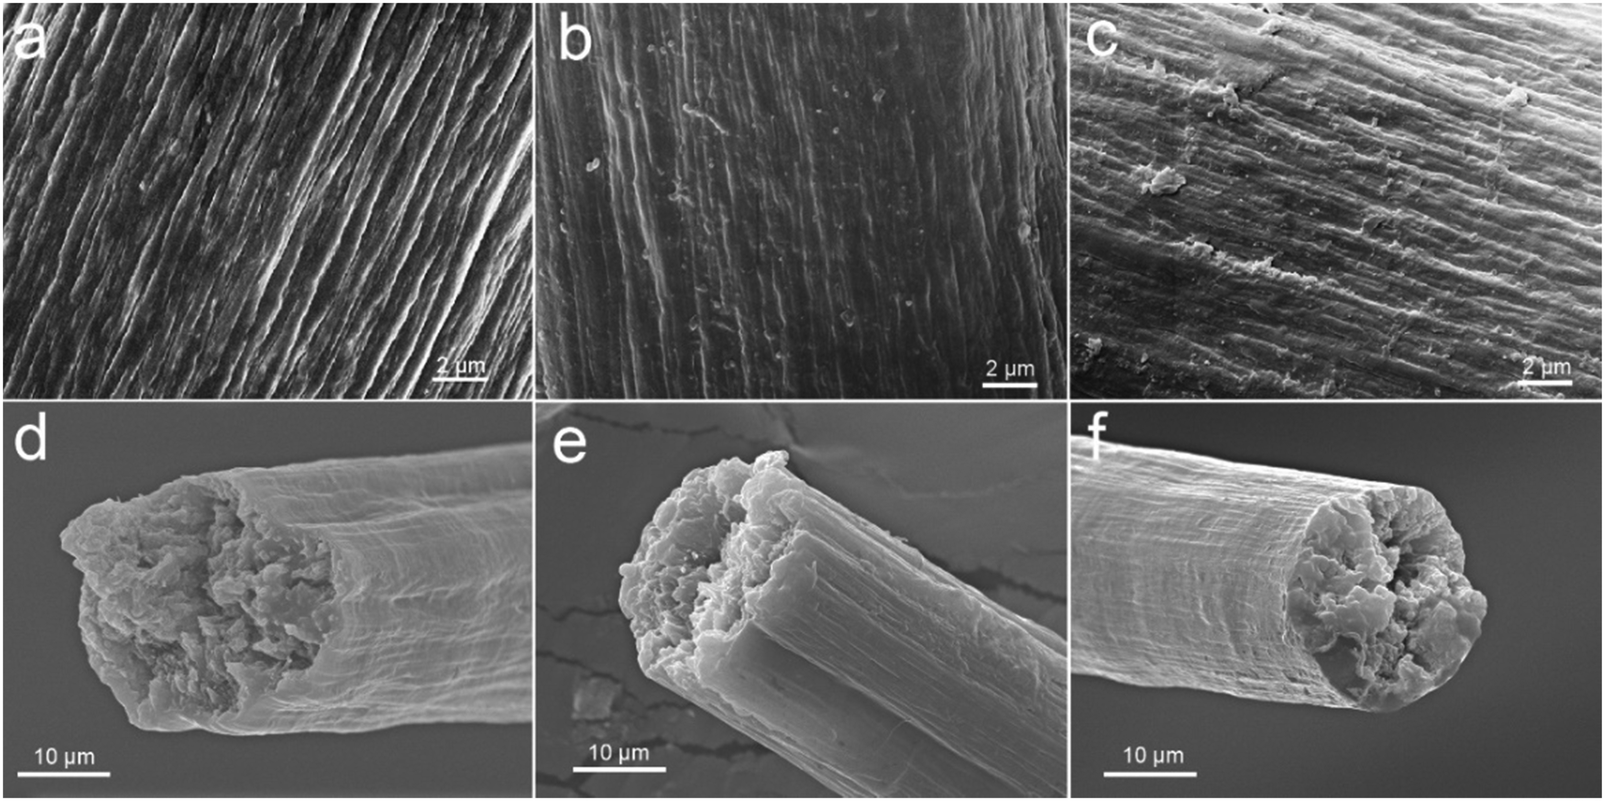 Facile construction of mechanically tough collagen fibers reinforced by  chitin nanofibers as cell alignment templates - Journal of Materials  Chemistry B (RSC Publishing) DOI:10.1039/C7TB02945D